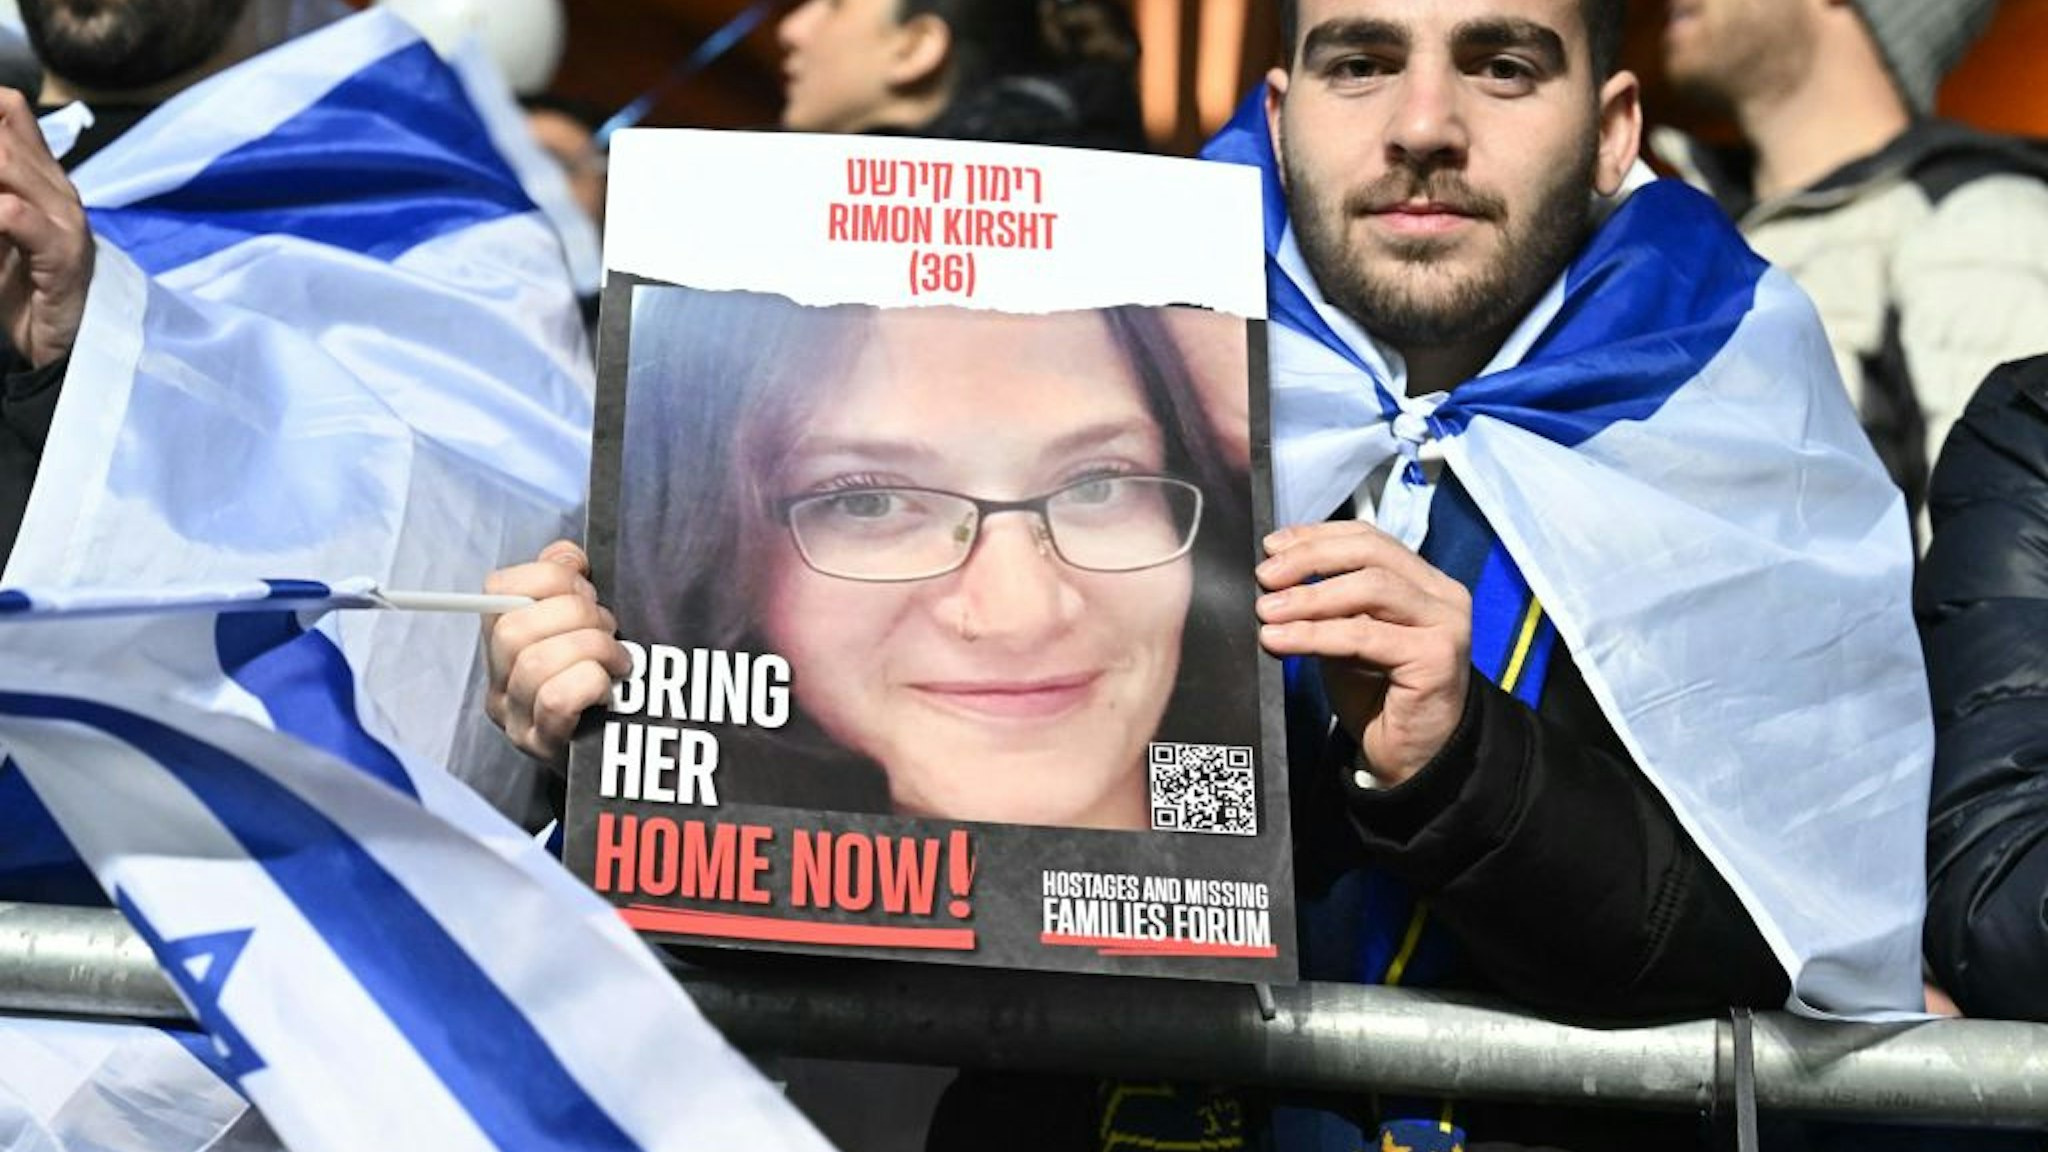 An Israel fan holds iup a placard calling for the release of Rimon Kirsht, one of the hostages held by Palestinian militants since the October 7 attack, prior to the UEFA Euro 2024 Group I qualification football match Israel v Switzerland at the Pancho Arena in Felcsut, west of Budapest, Hungary on November 15, 2023. (Photo by Attila KISBENEDEK / AFP) (Photo by ATTILA KISBENEDEK/AFP via Getty Images)